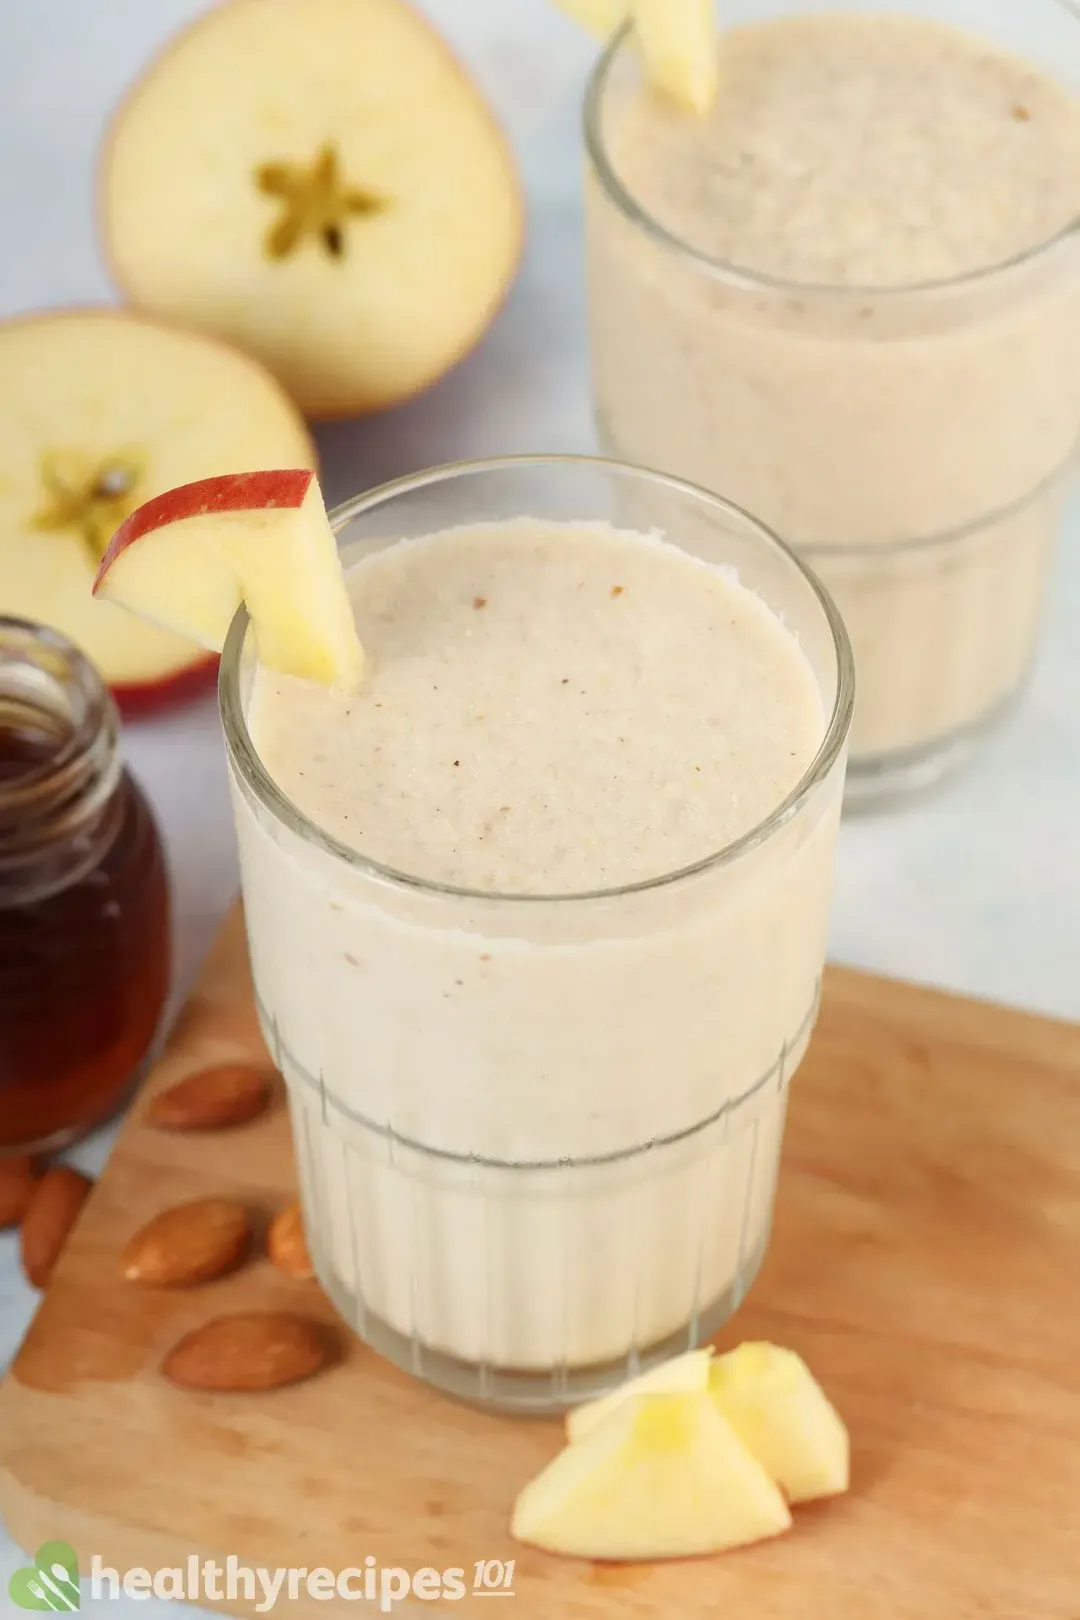 How Long Does Apple Cinnamon Smoothie Last